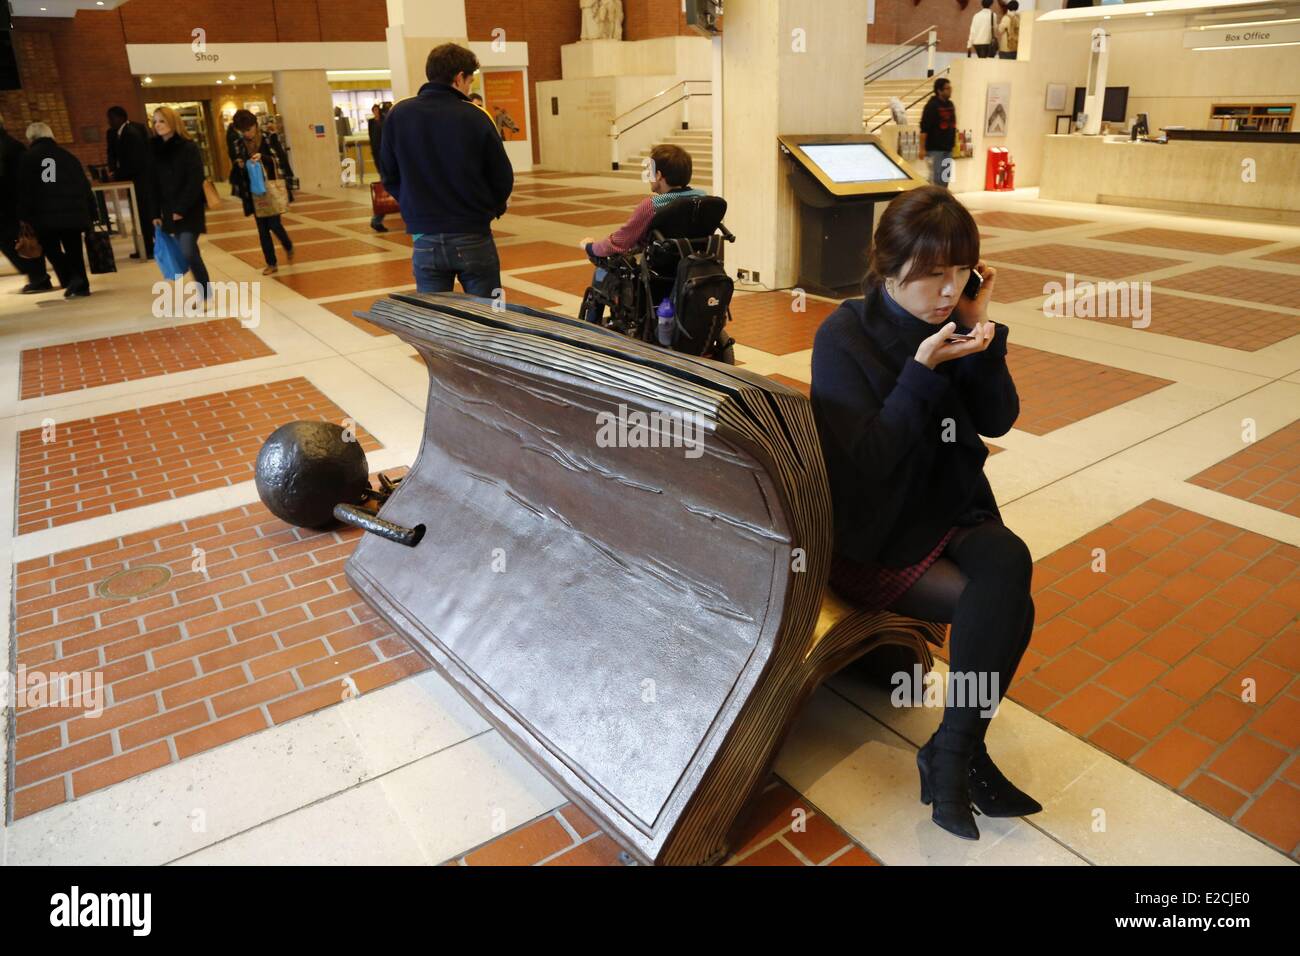 United Kingdom, London, Saint Pancras, the British Library, one of the biggest library of the world Stock Photo